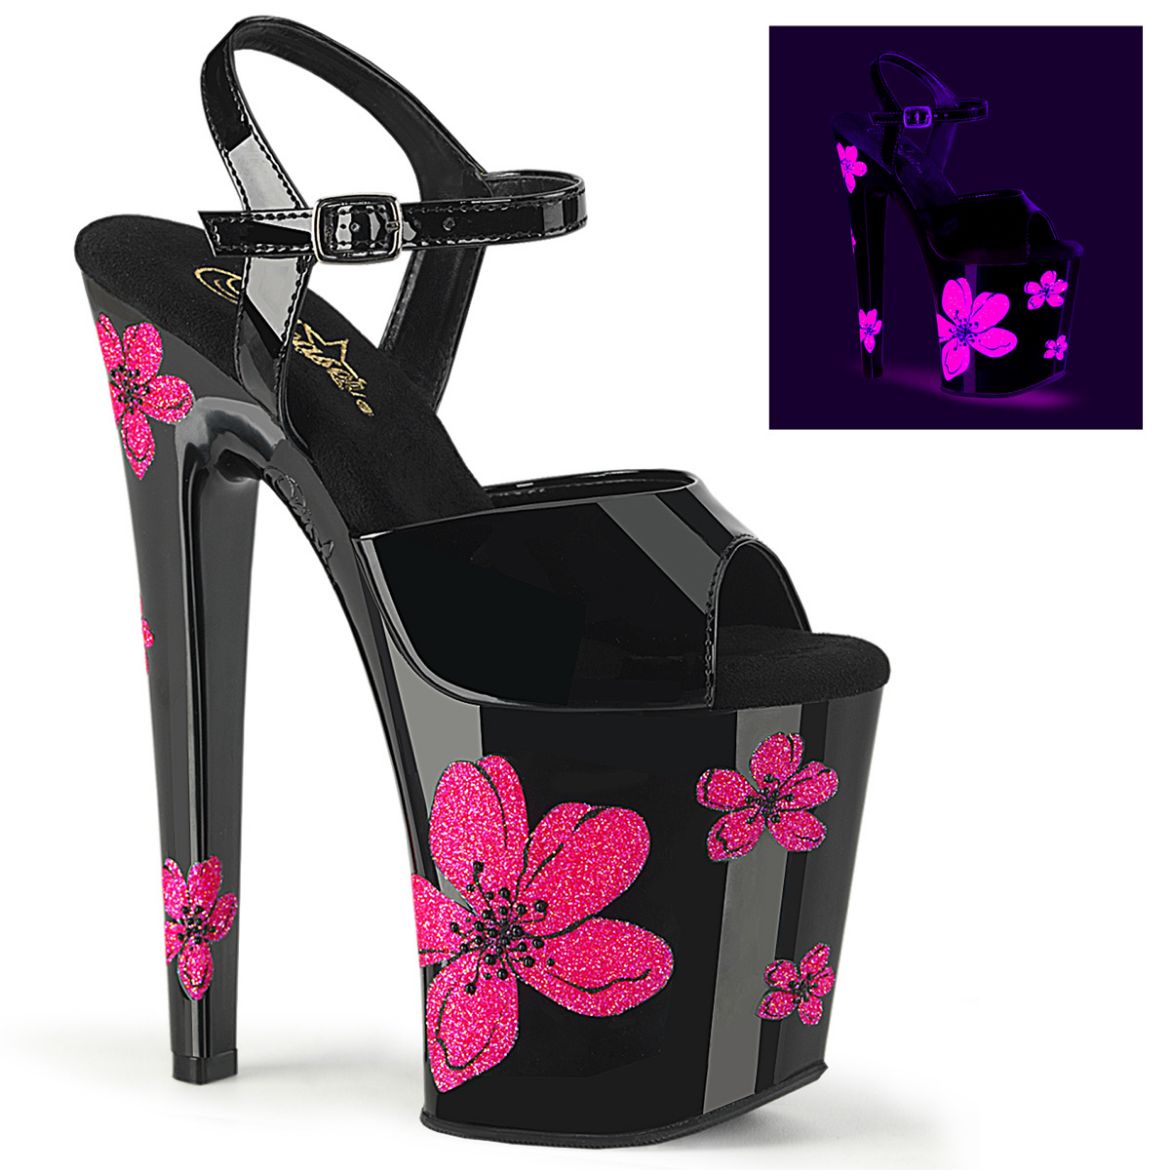 Product image of Pleaser XTREME-809HB Blk Pat/Blk-Neon Pink 8 Inch Heel 4 Inch PF Ankle Strap Sandal w/Hibiscus Flowers